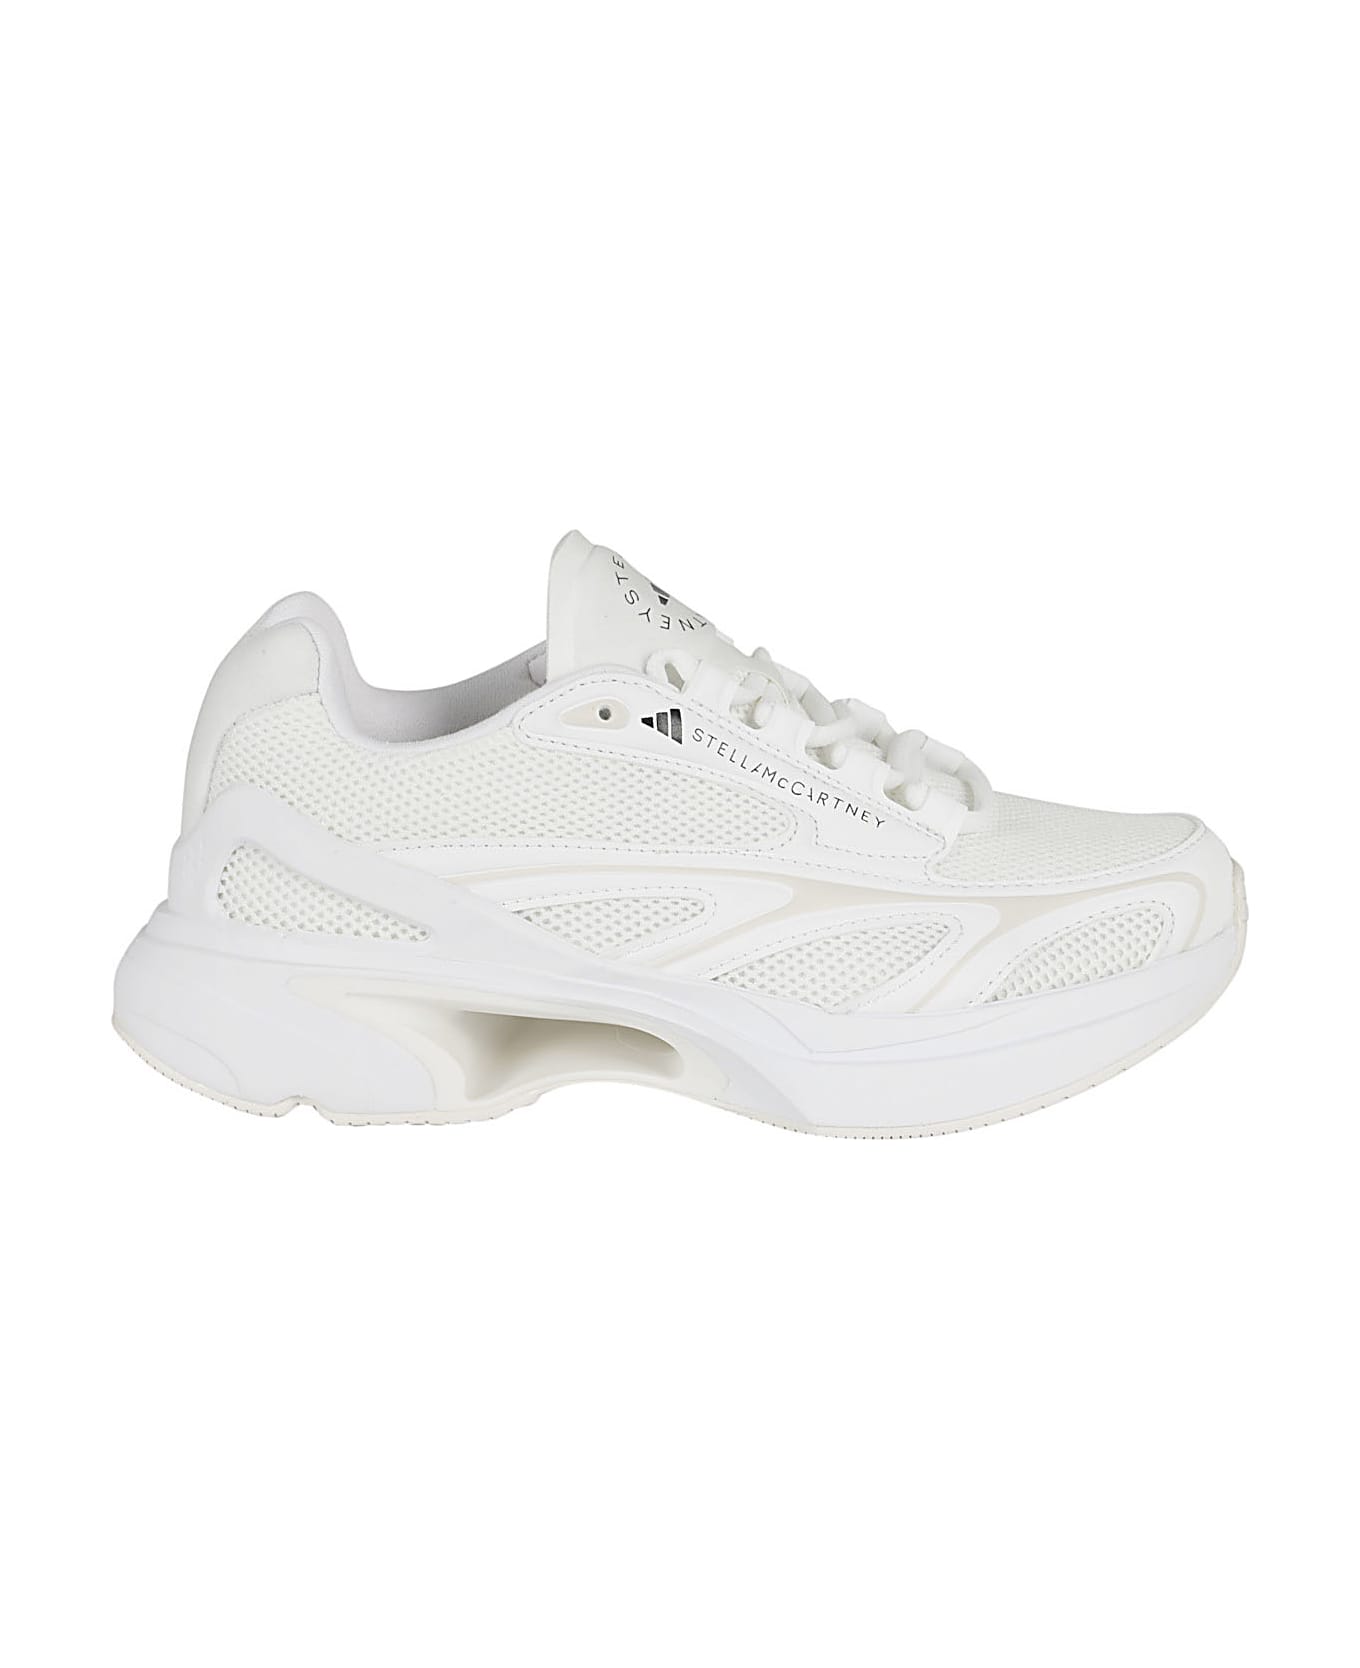 Adidas by Stella McCartney Sportswear 2000 Lace-up Sneakers - White スニーカー